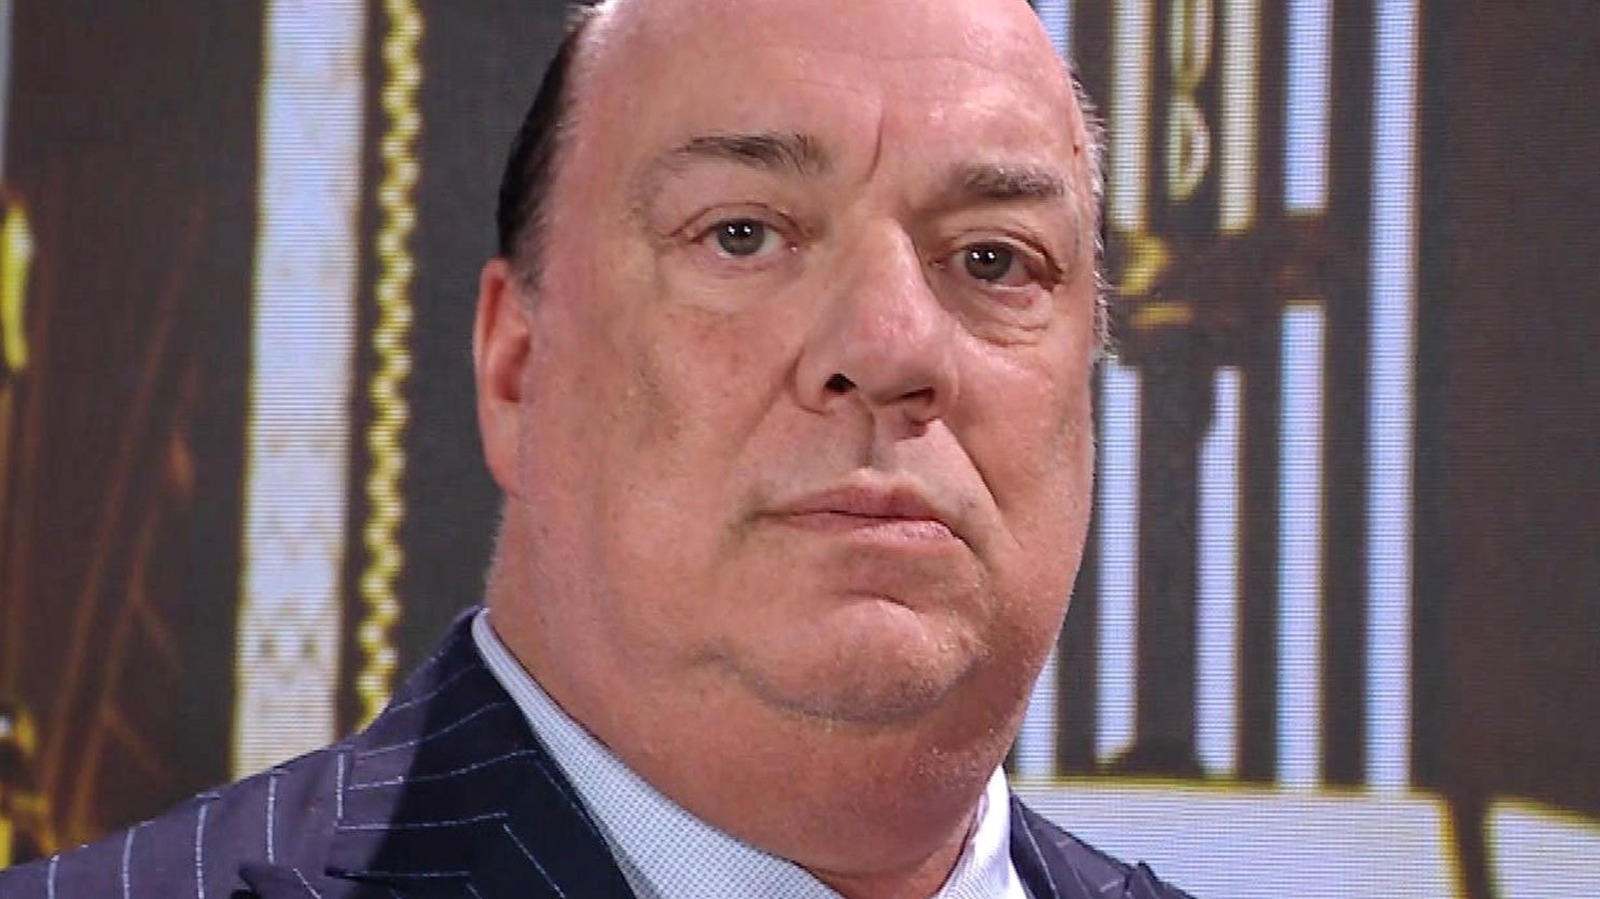 Paul Heyman On His Reticence To Sum Up ECW Legend Terry Funk’s Life ‘In A Soundbite’